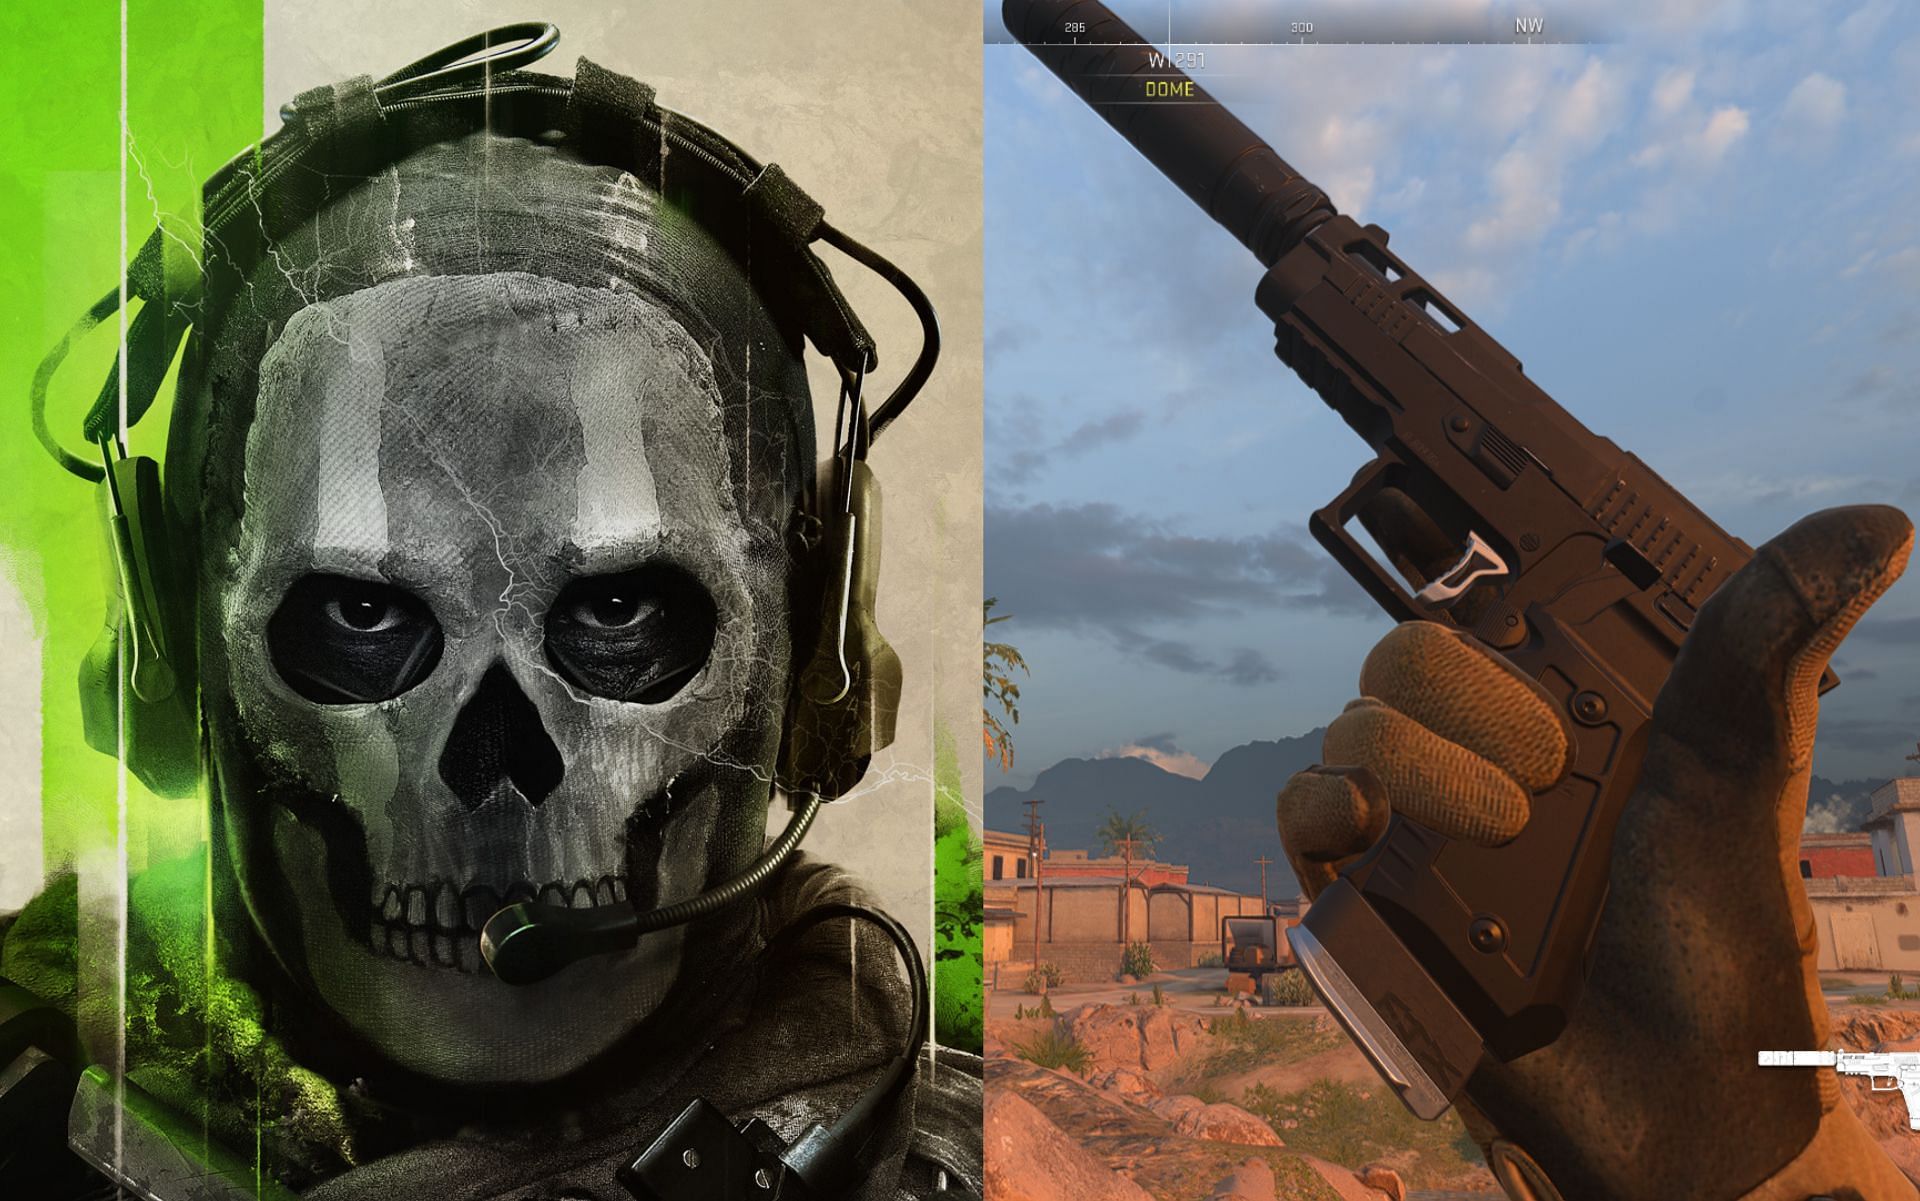 The P890 in Modern Warfare 2 (Images via Activision)